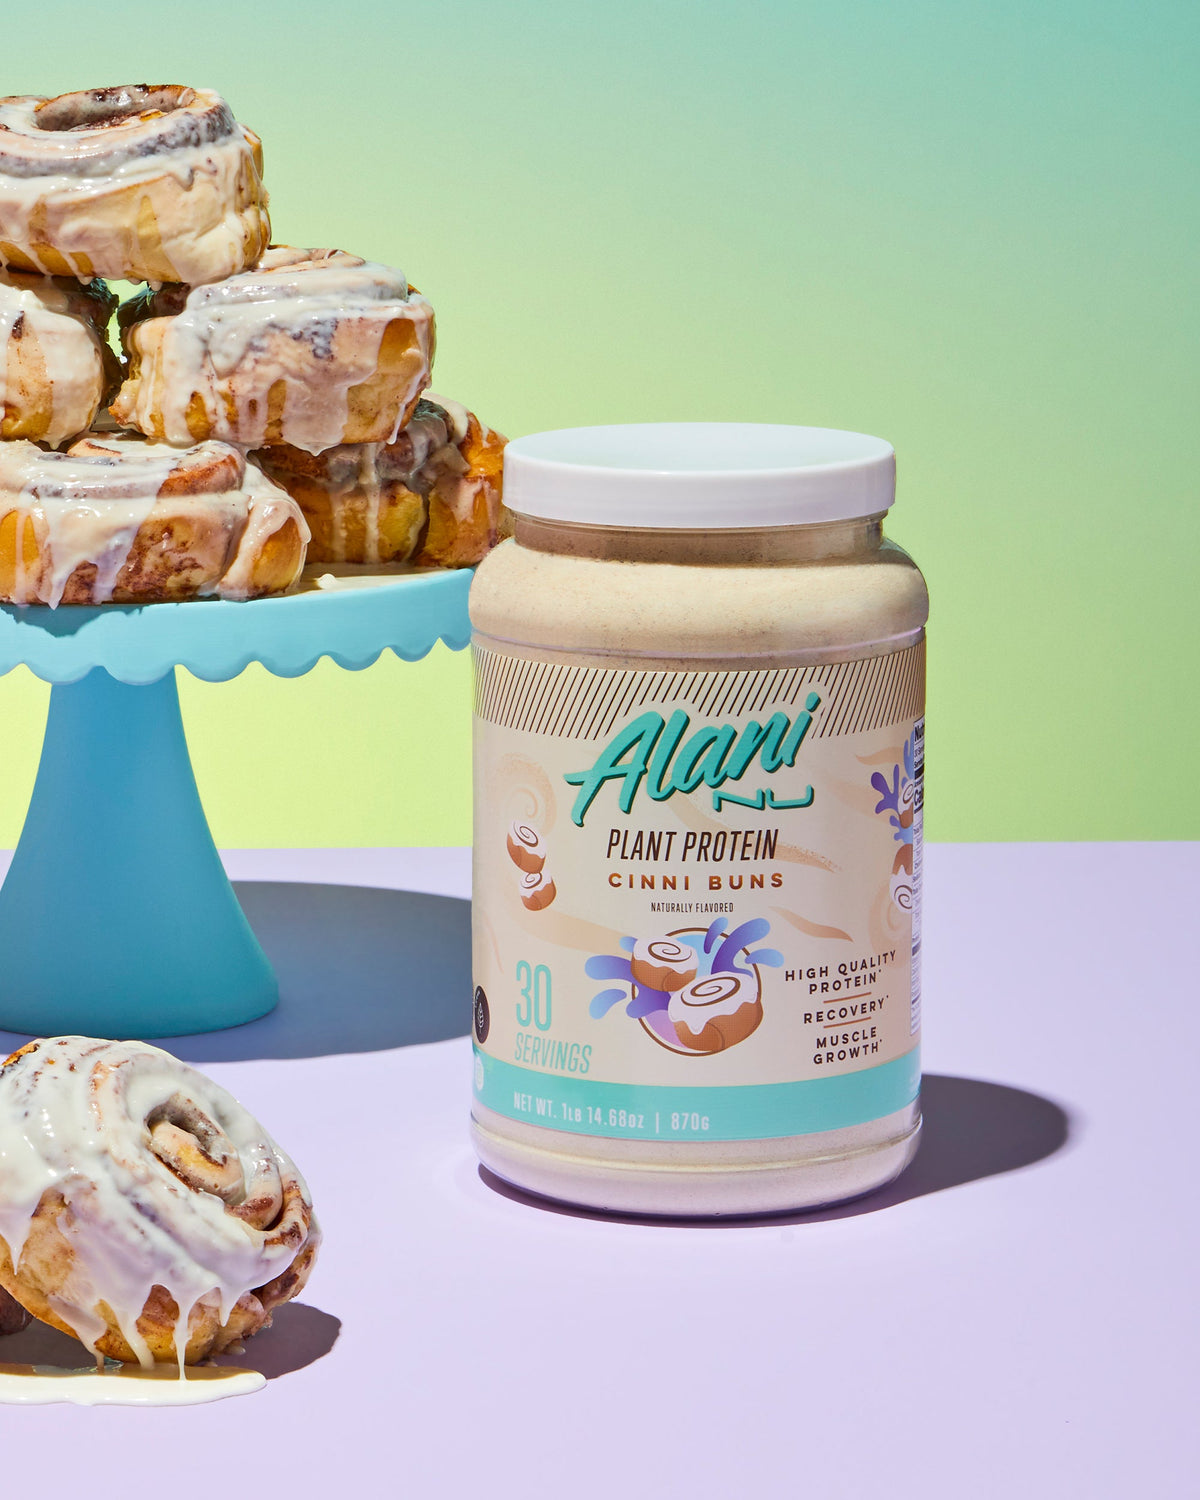 A cake plater of cinnamon rolls next to Plant Protein in Cinni Buns flavor container.